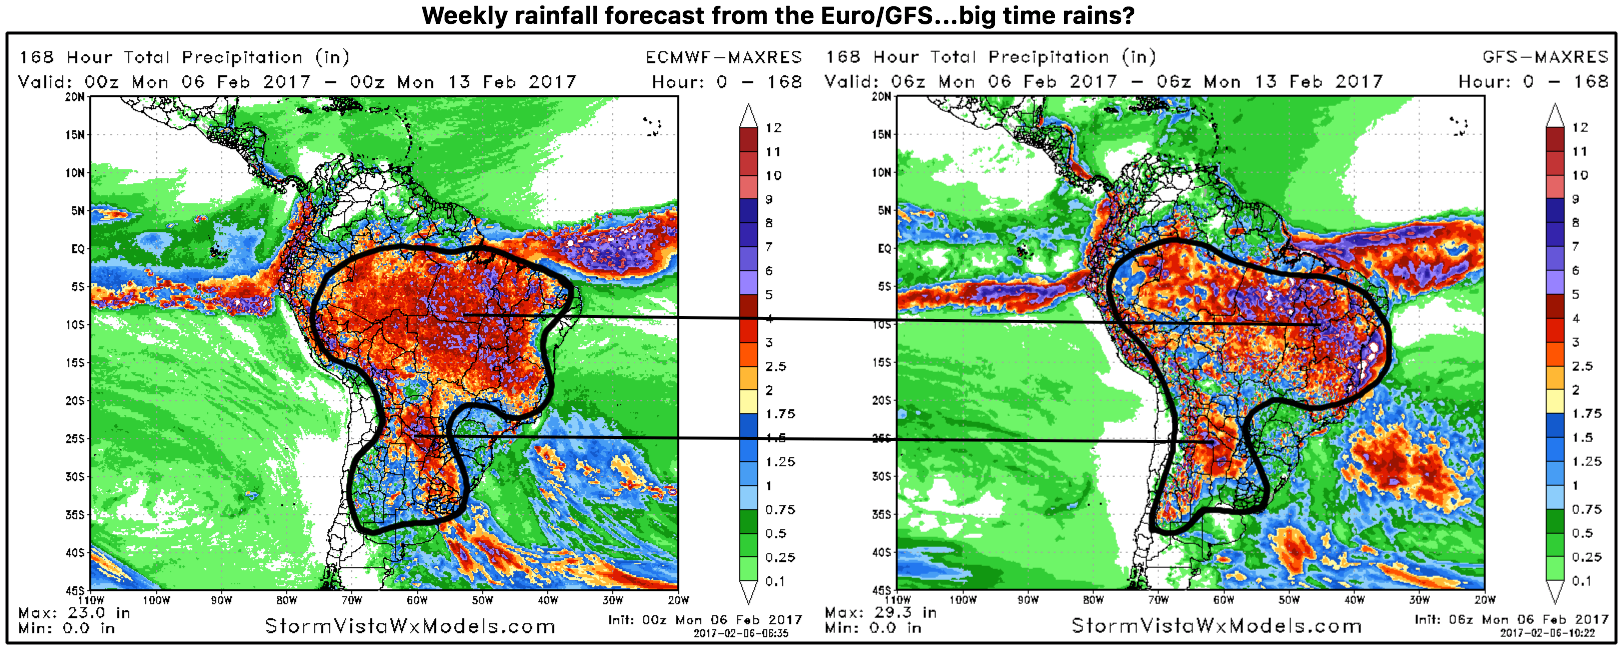 #AG #AGwx South America: A check on rains this past weekend + week ahead forecast…WET? K.